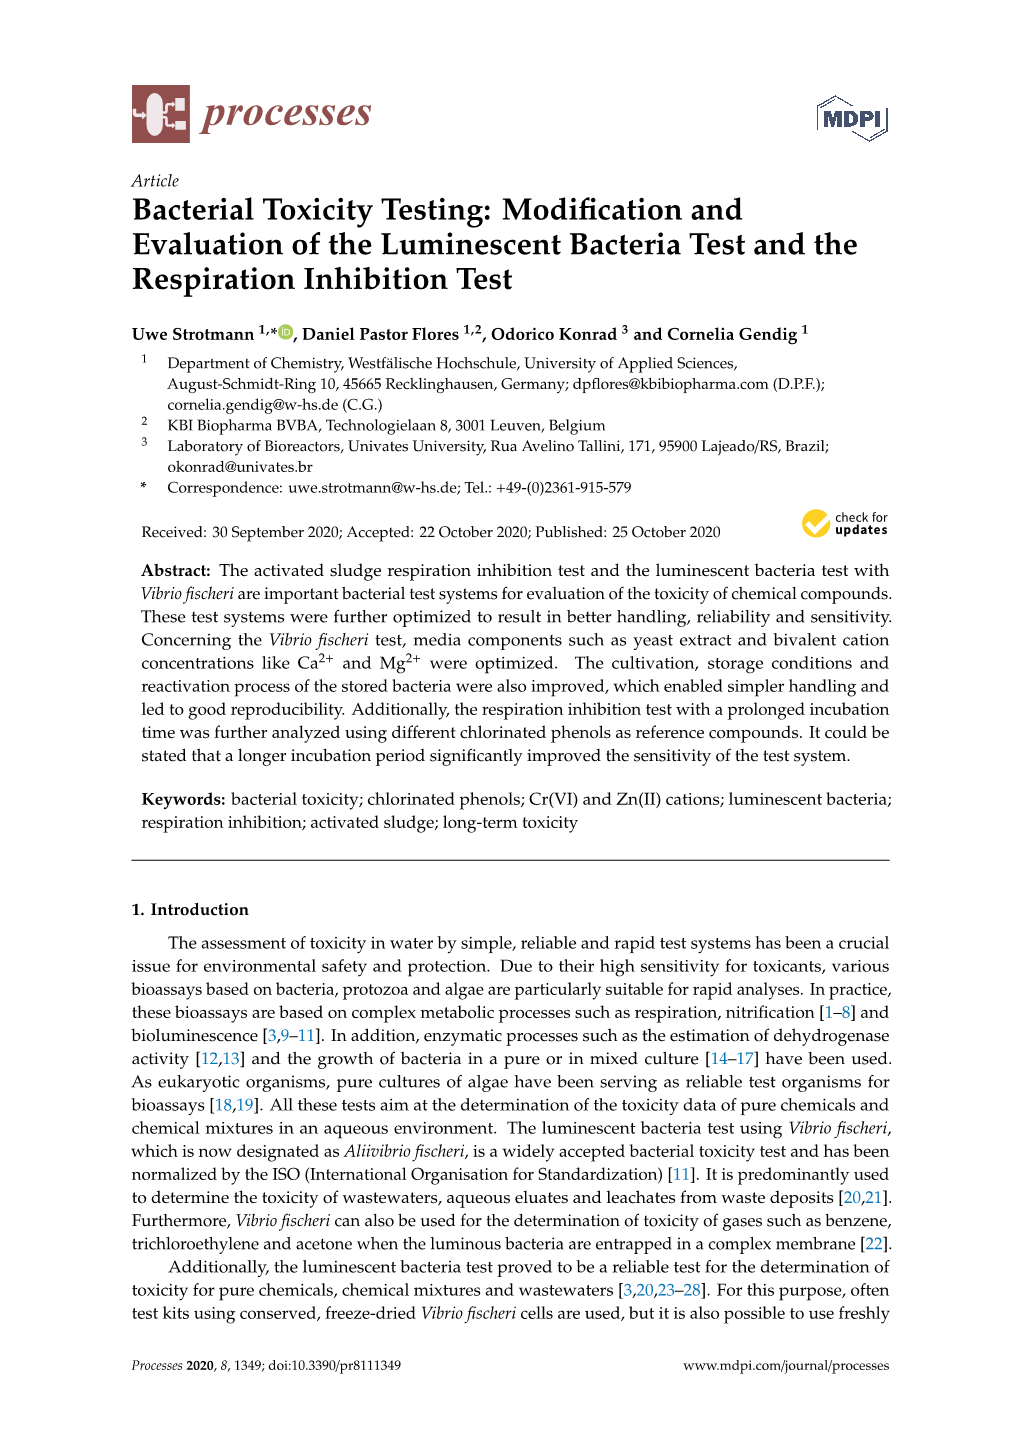 Bacterial Toxicity Testing: Modiﬁcation and Evaluation of the Luminescent Bacteria Test and the Respiration Inhibition Test